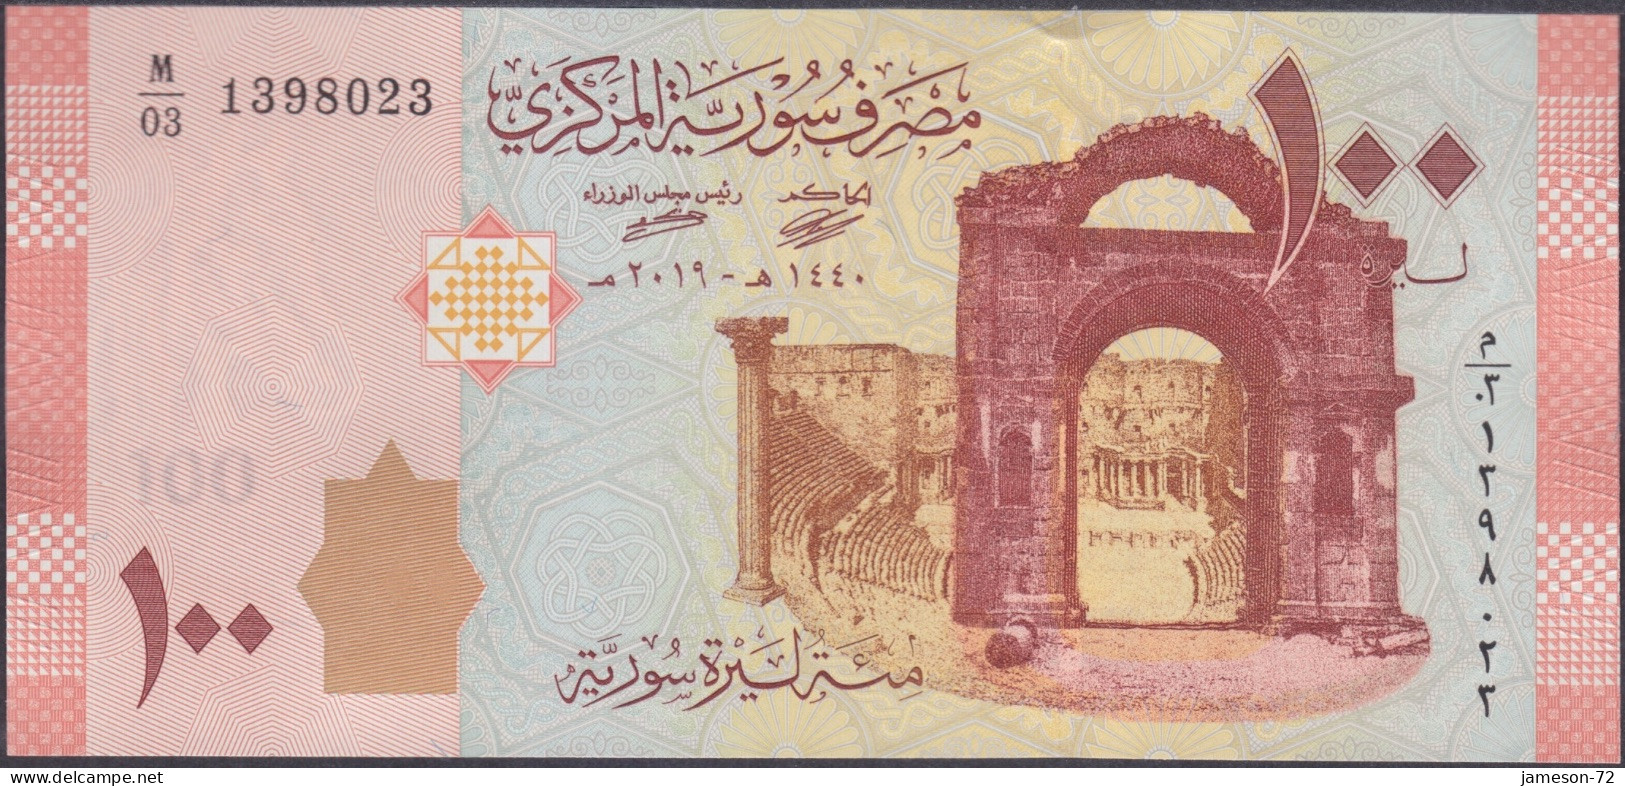 SYRIA - 100 Pounds AH1440 2019AD P# 113 Middle East Banknote - Edelweiss Coins - Siria